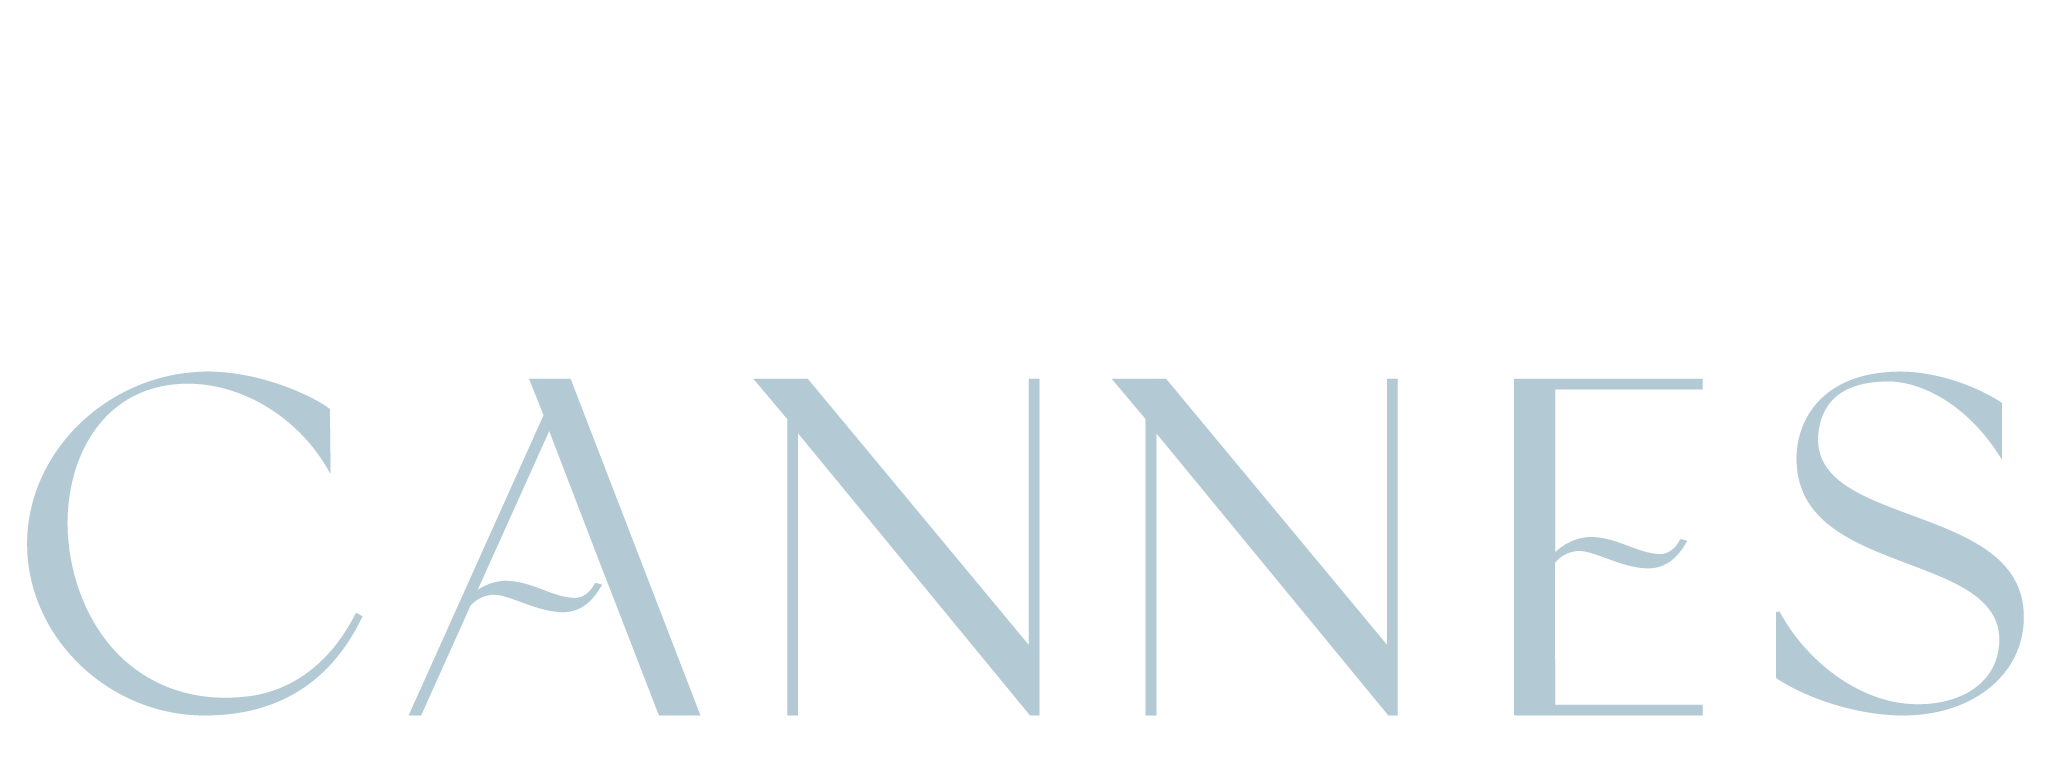 One Cannes